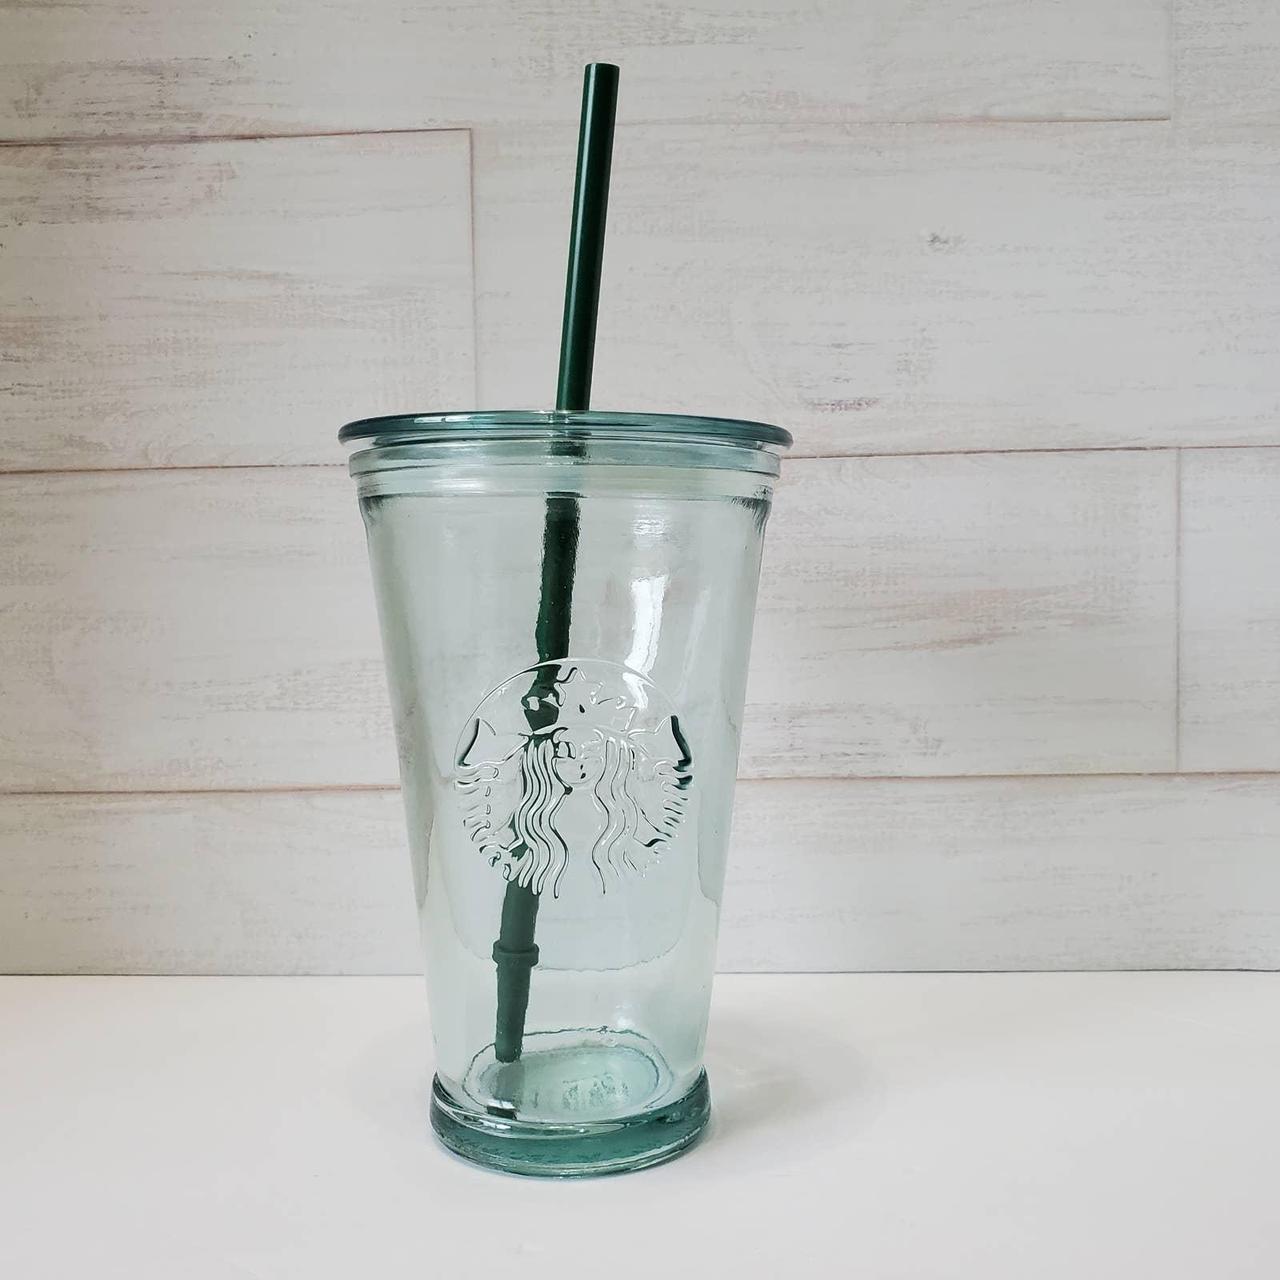 STARBUCKS Recycled Green Glass Tumbler Cup w/ Lid, Straw, 16 Oz